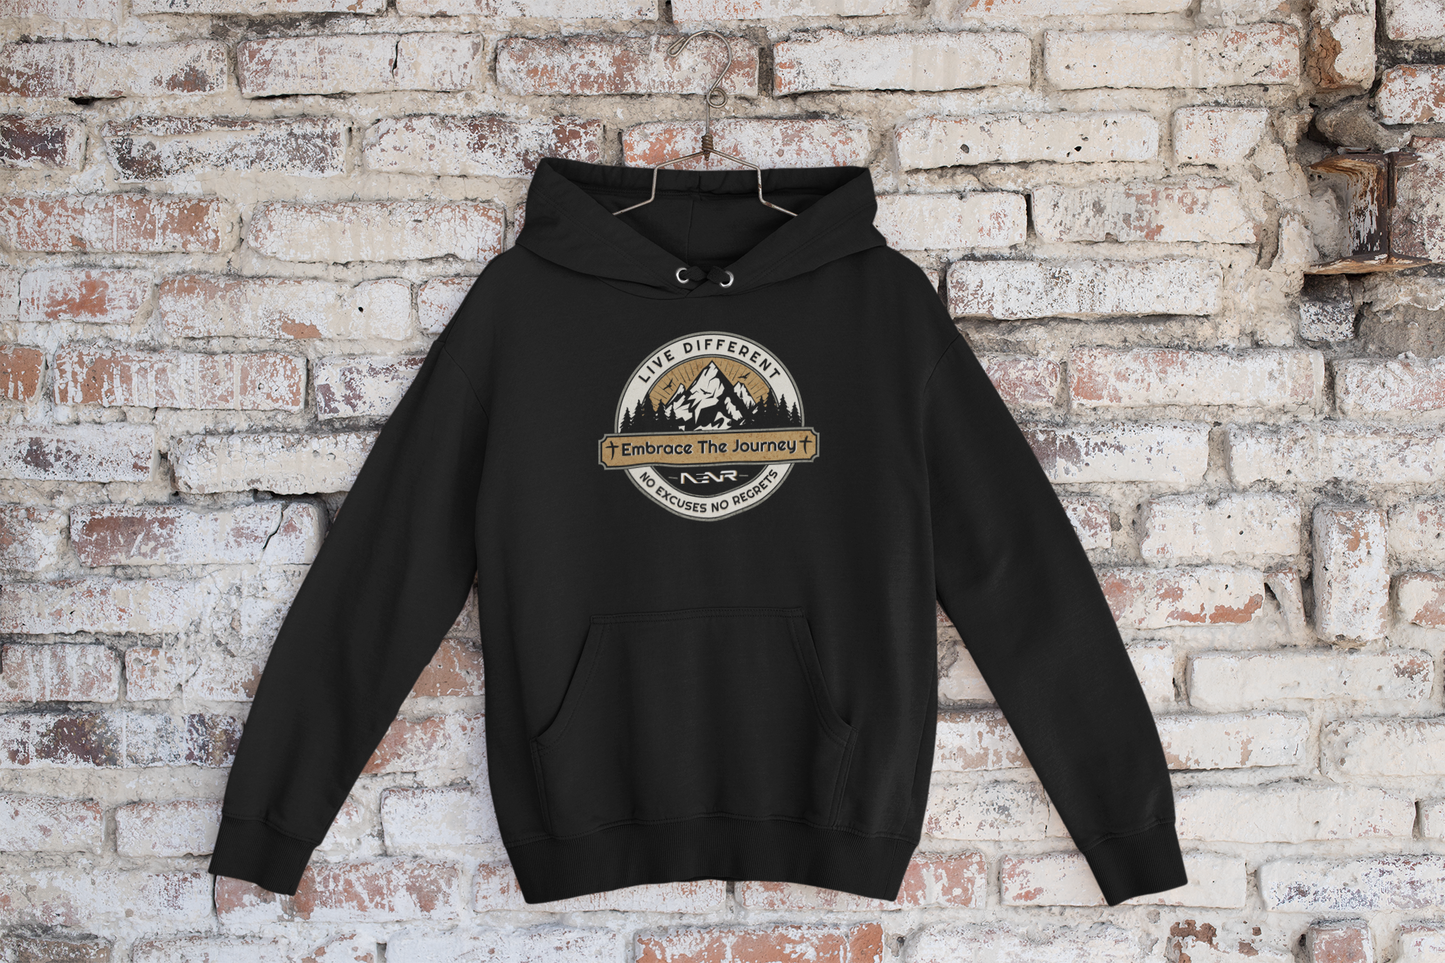 EMBRACE THE JOURNEY ~ Unisex Hoodie